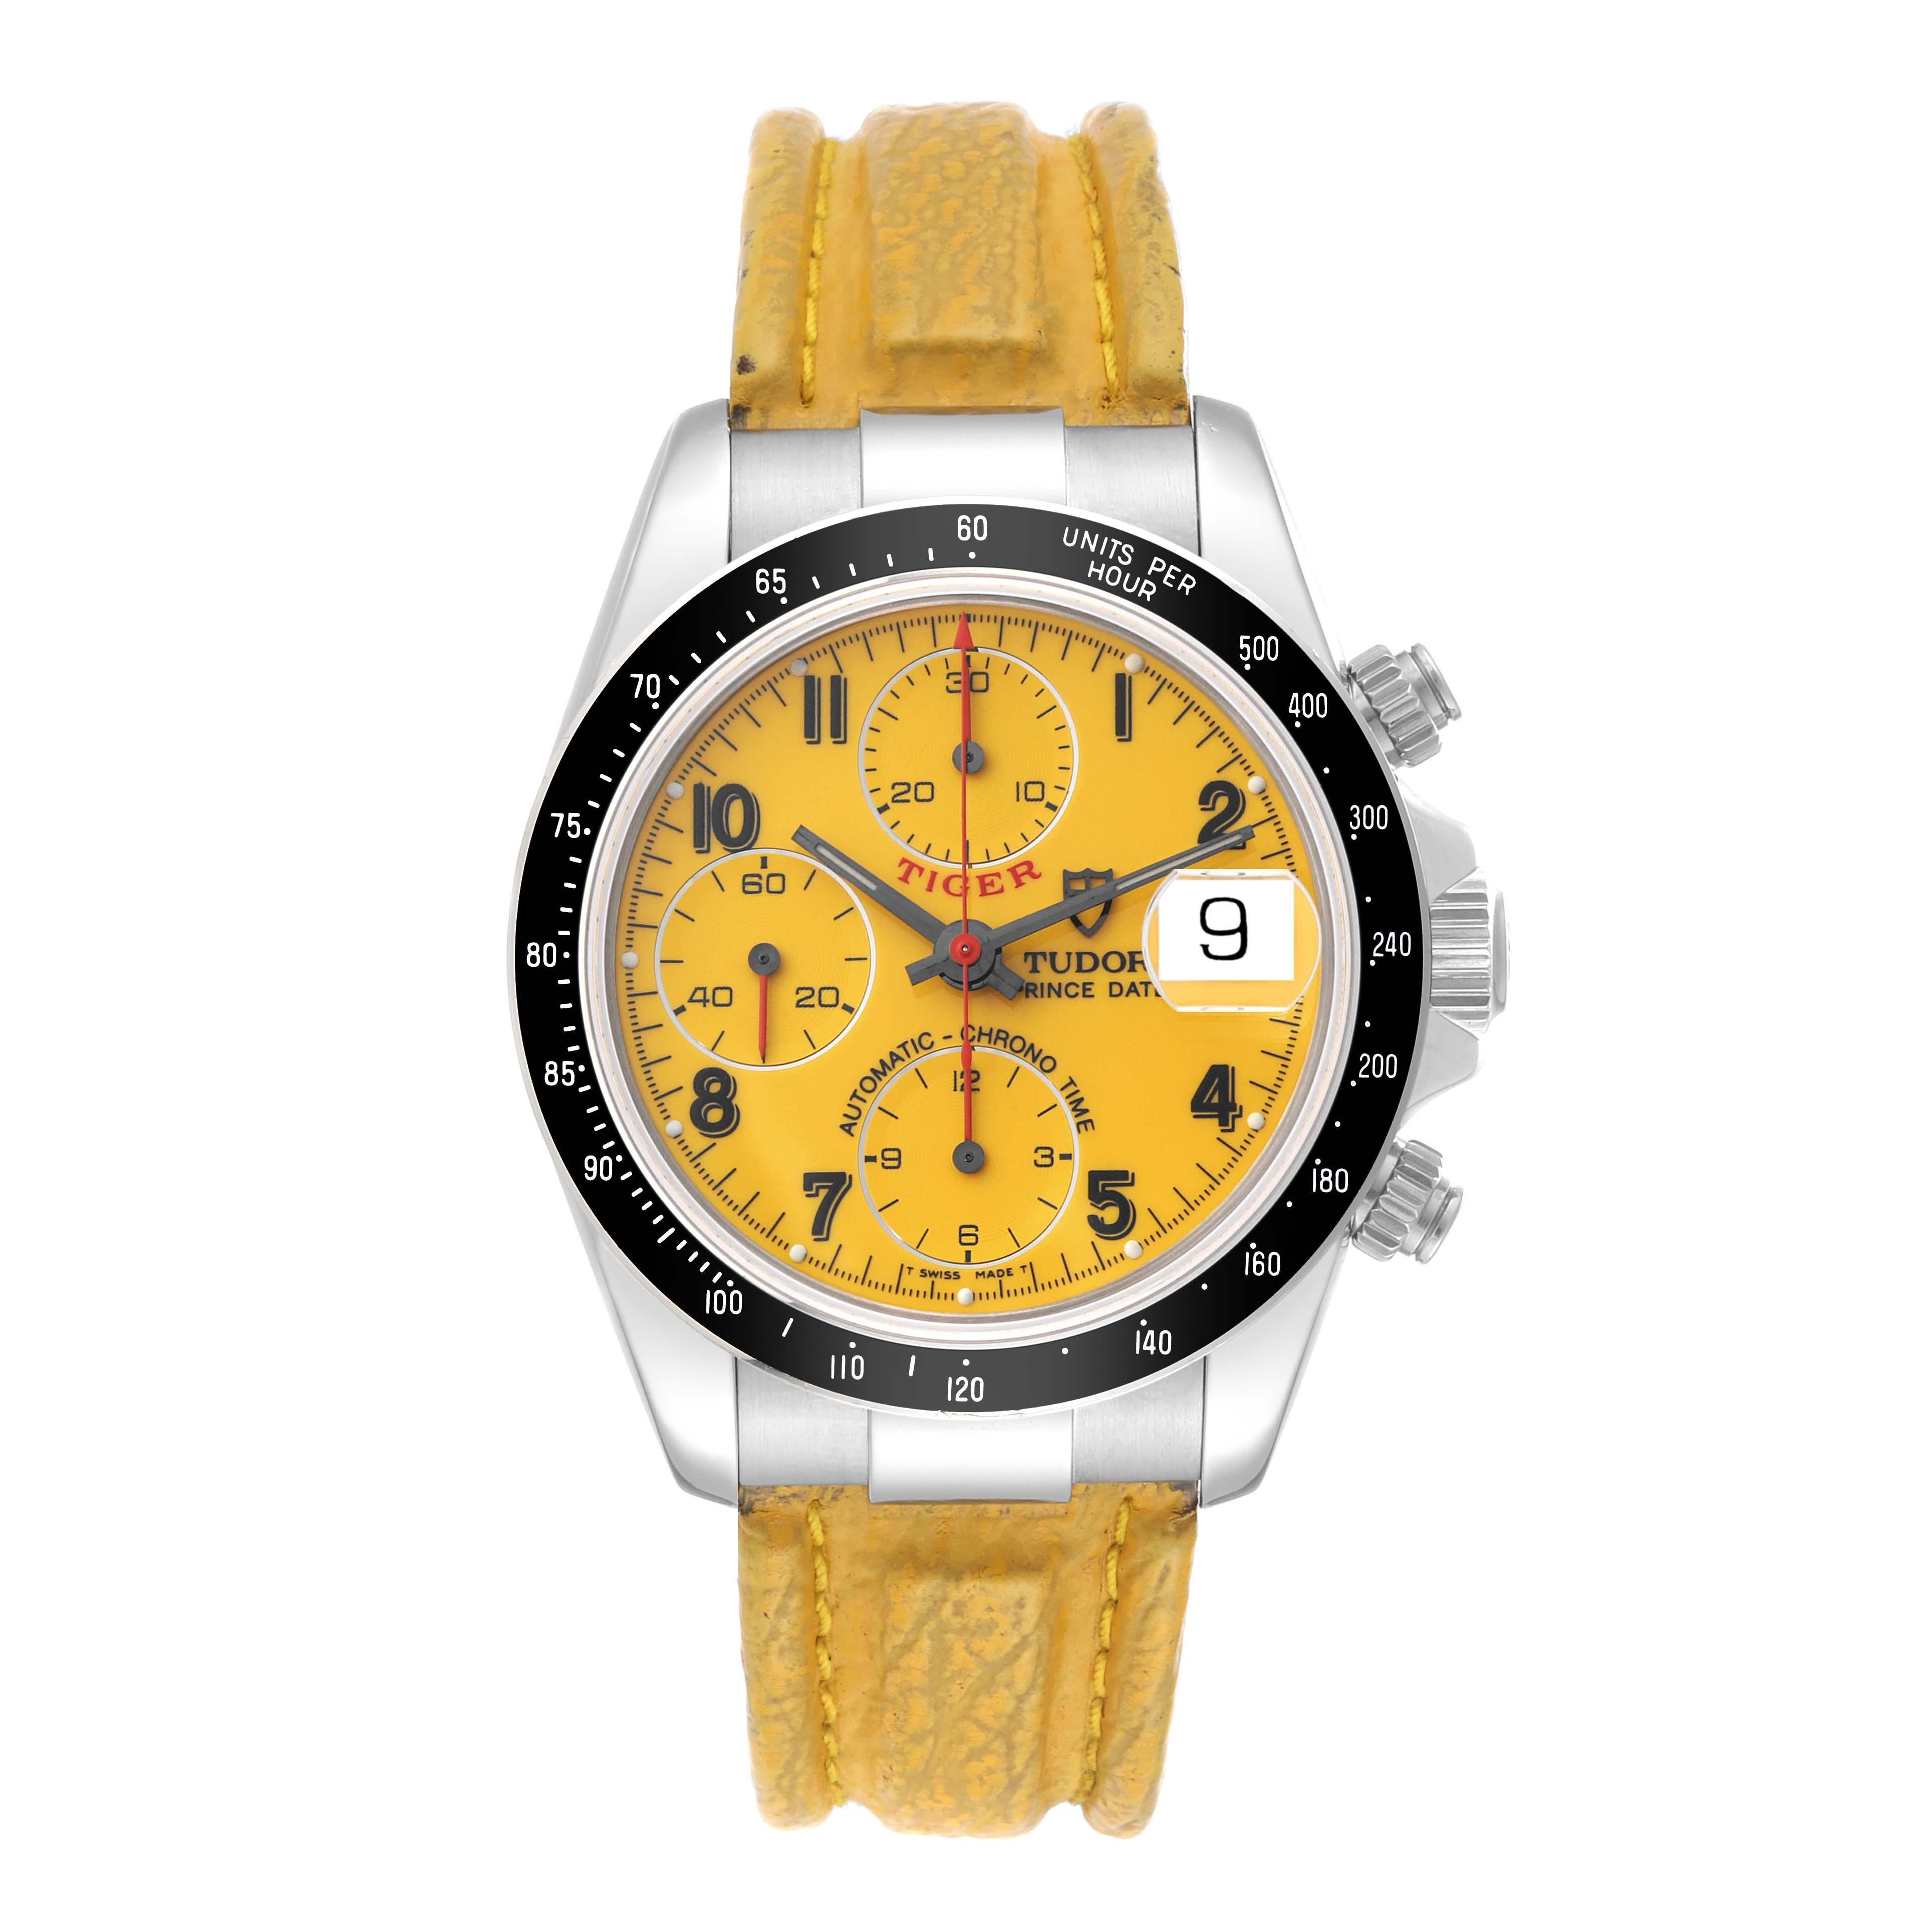 Tudor Tiger Woods Prince Yellow Dial Steel Mens Watch 79260 Box Papers. Automatic self-winding movement with chronograph function. Stainless steel oyster case 40.0 mm in diameter. Tudor logo on a crown. Black tachymeter bezel. Scratch resistant